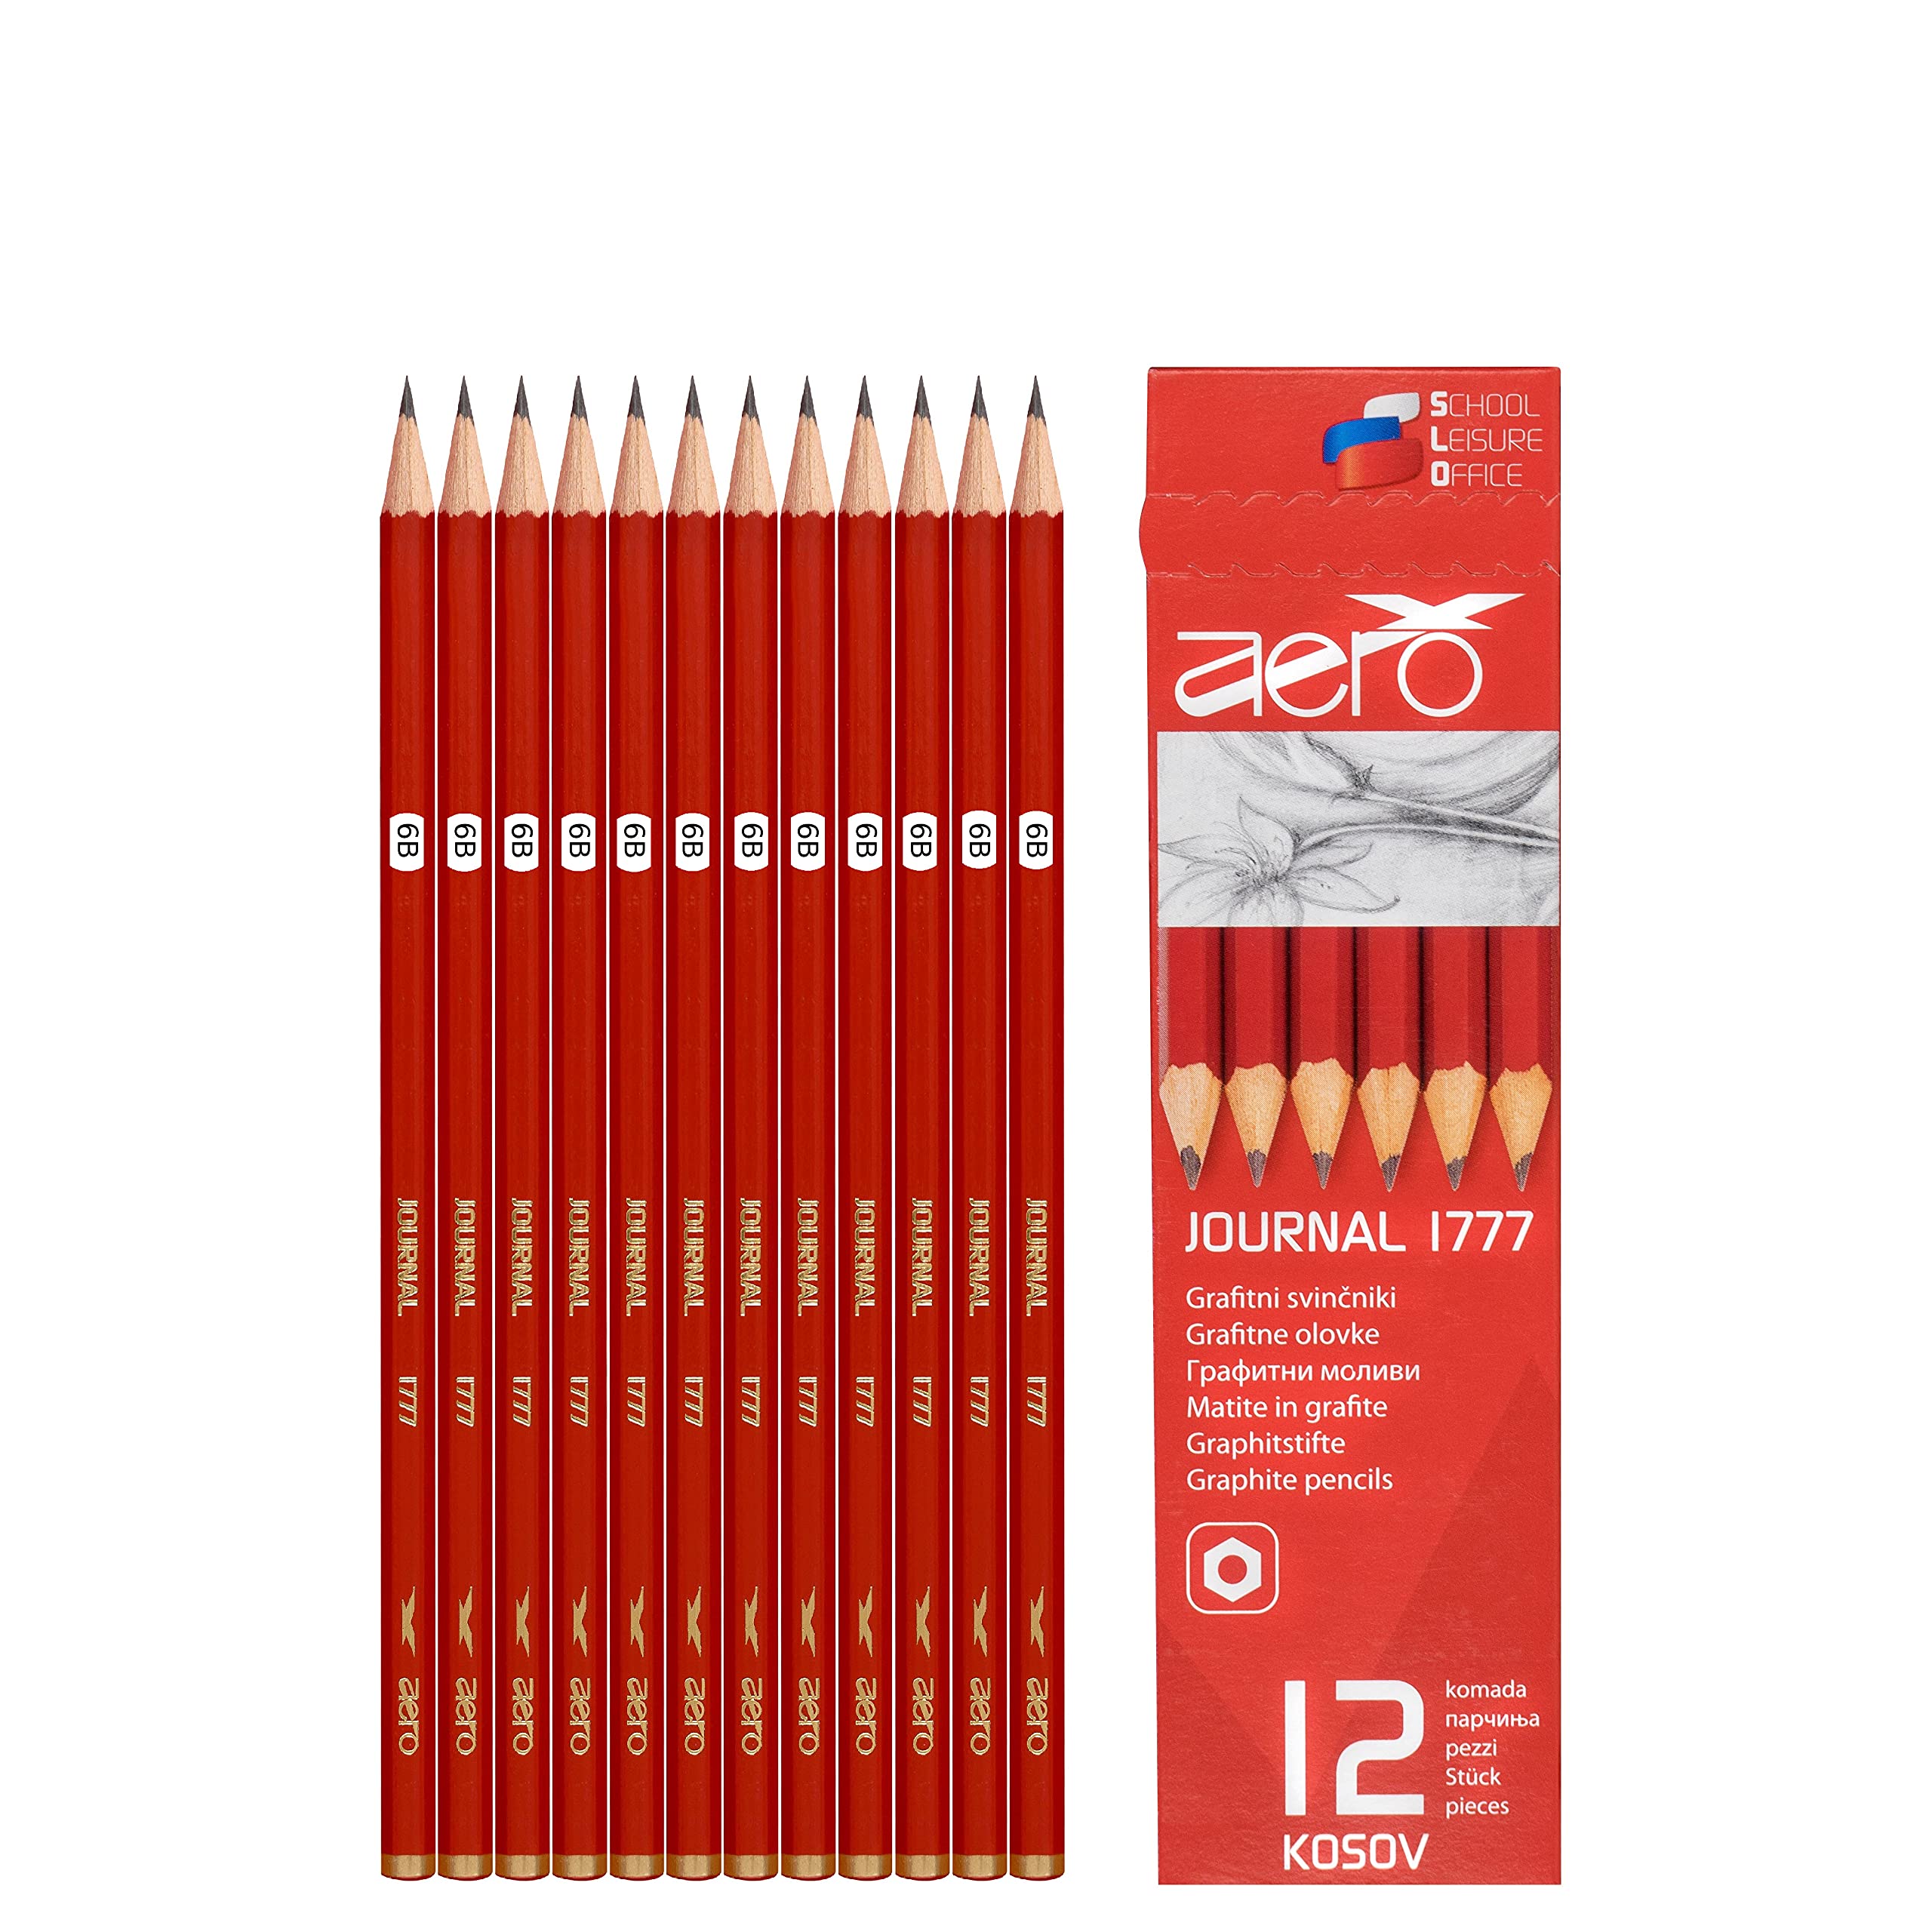 Pepy Aero Graphite Professional Drawing Pencils - Set of 12 6B  Pre-Sharpened Black Lead Pencils Perfect for Drawing, Sketching and  Shading, Graphic and Fine Art Set of 12 - 6B Black